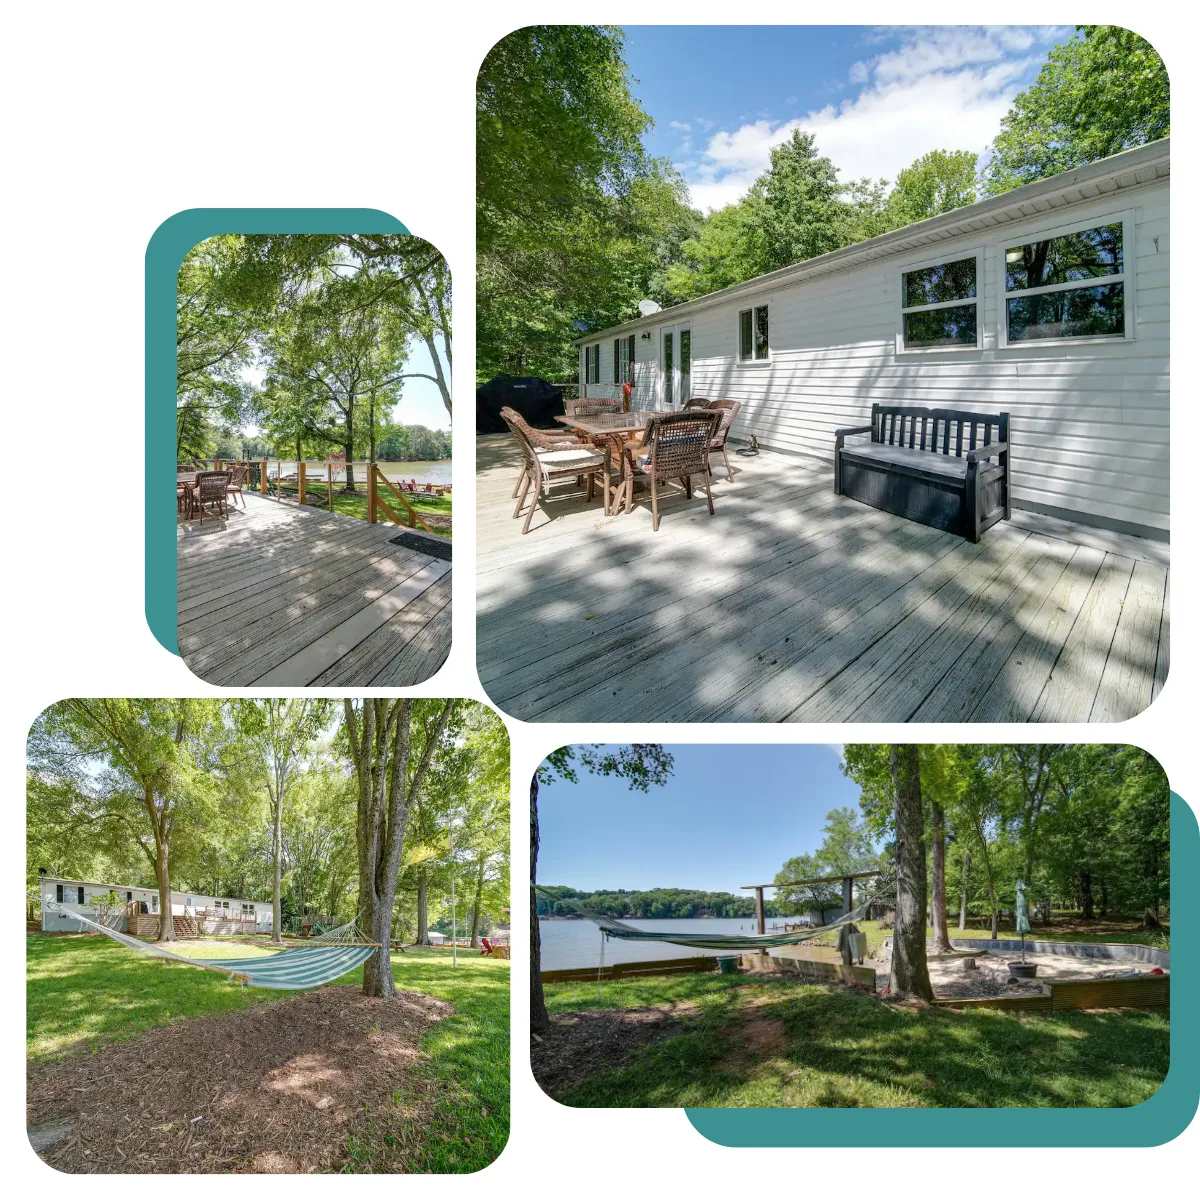 At Lake Wylie Retreat, the property's backyard is a peaceful haven, ideal for relaxing and outdoor fun, with a cozy hammock nestled amid greenery for napping or reading, and a large open space for group activities.